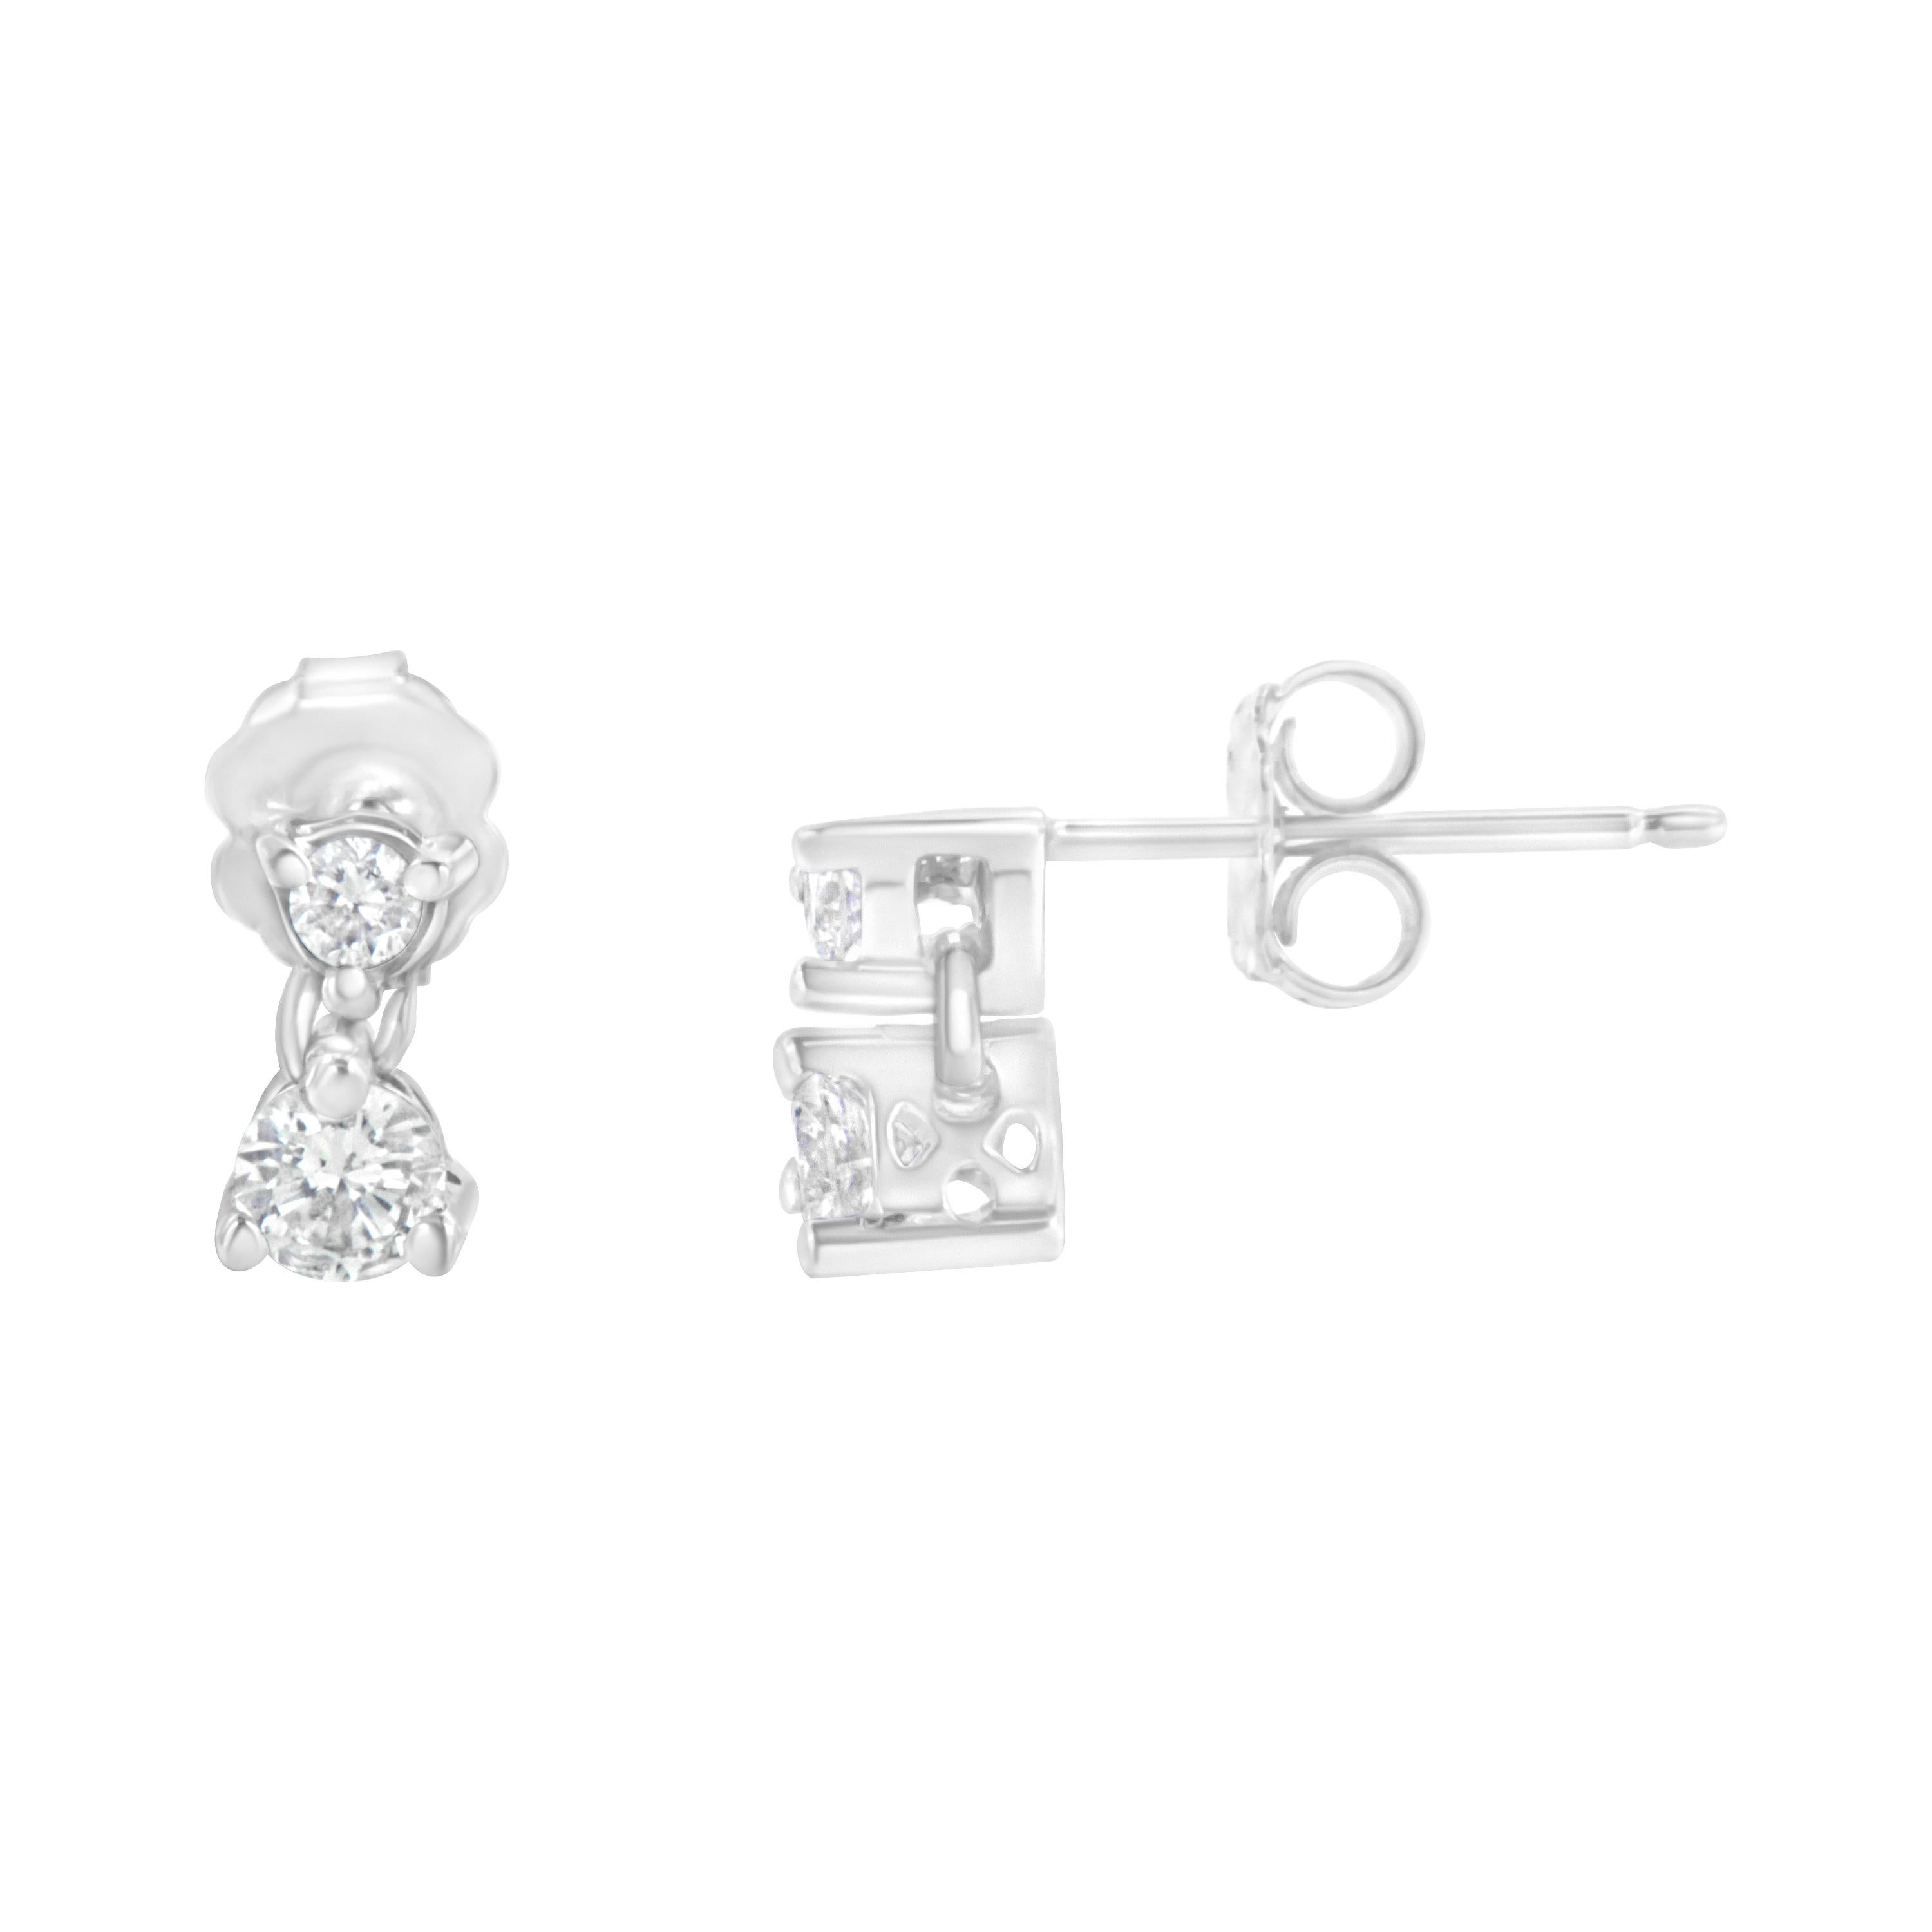 Accent your look with this chic pair of 1/3 ct tdw stud earrings. Composed of precious 14k white gold, these gorgeous earrings are finely burnished to shine. Further, the embellishment with flickering round cut diamonds in a prong setting giving